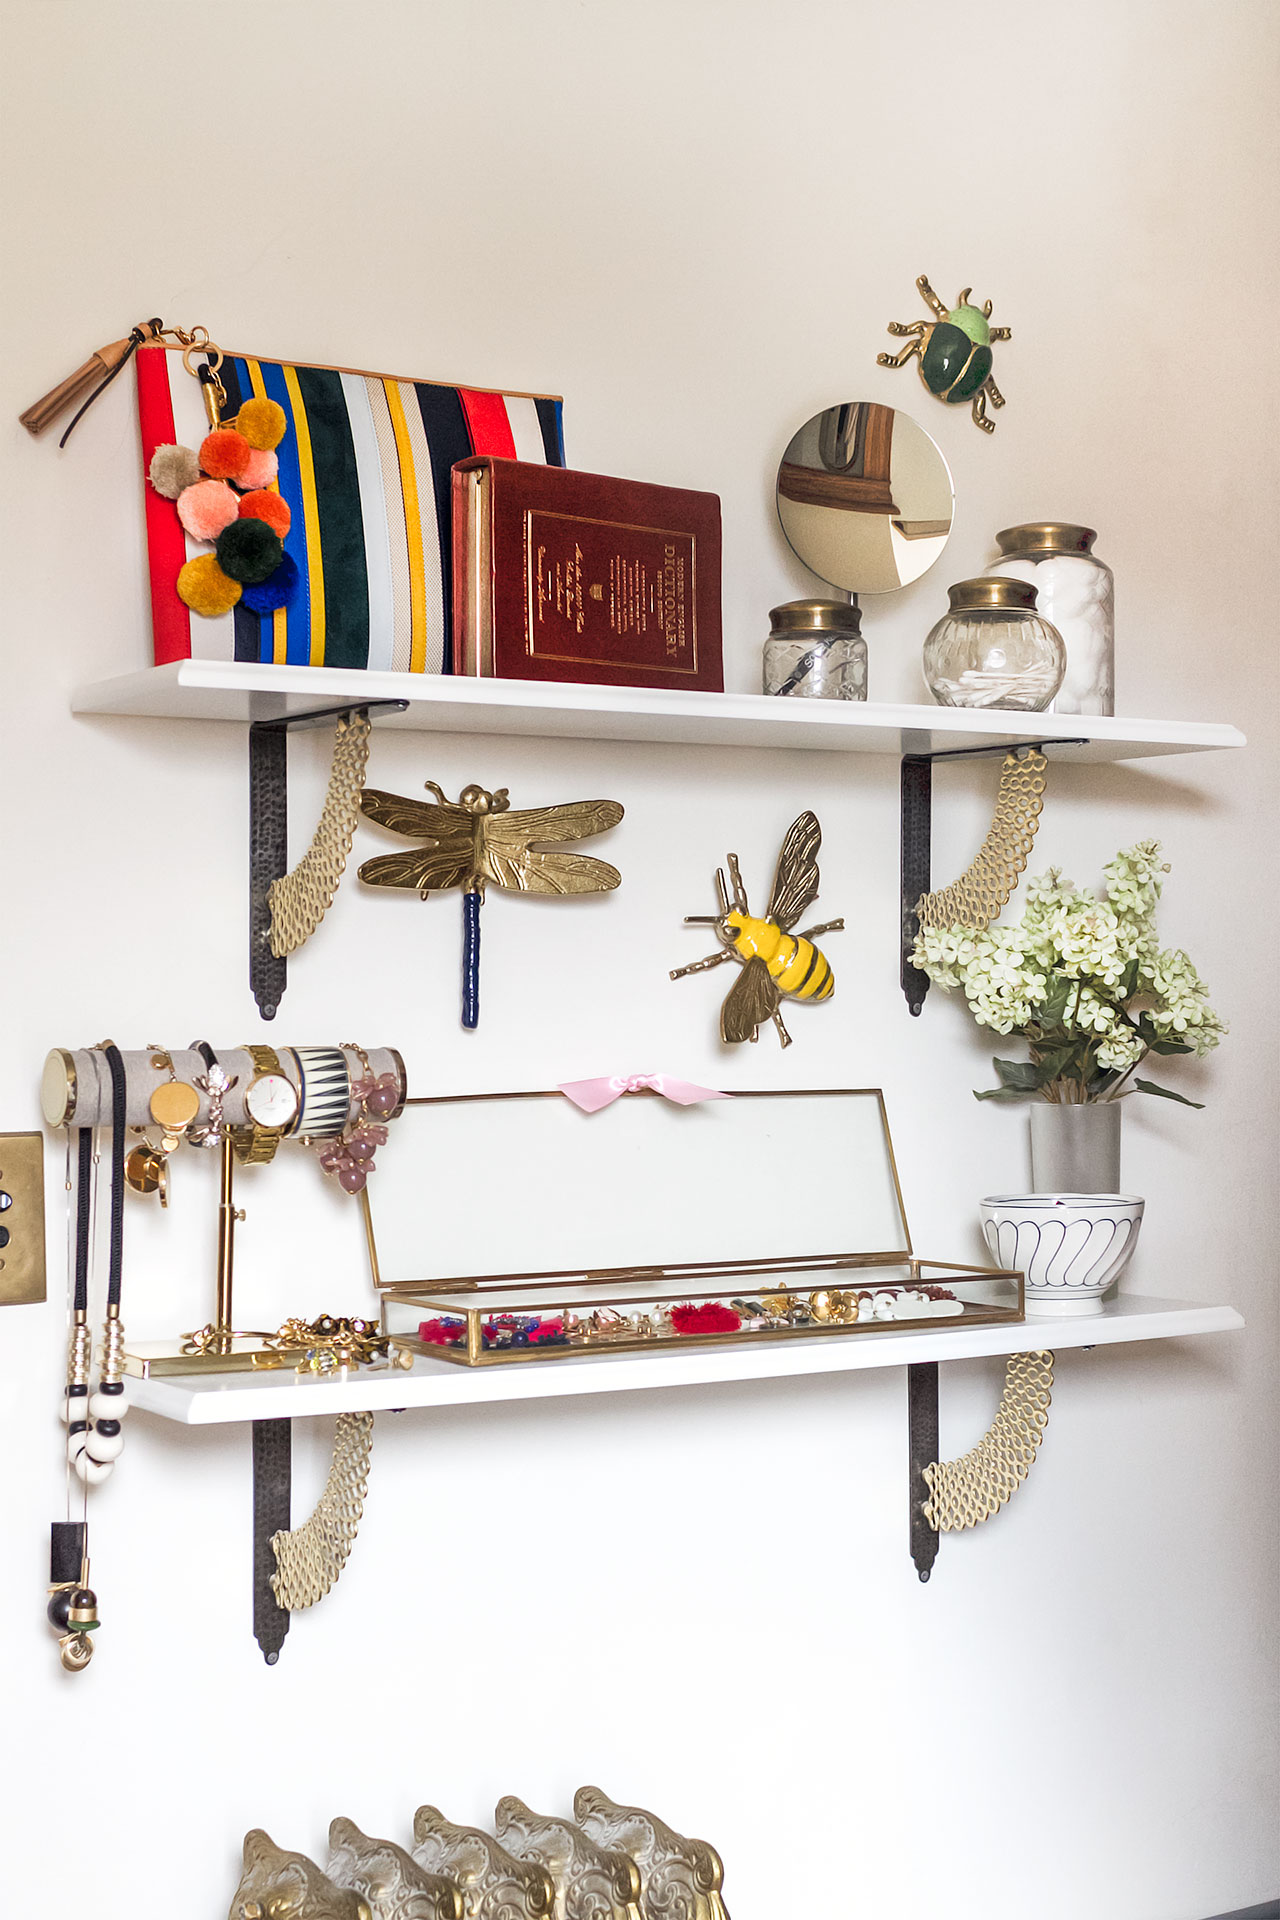 Closet Shelves for Jewelry and Accessories | Making it Lovely